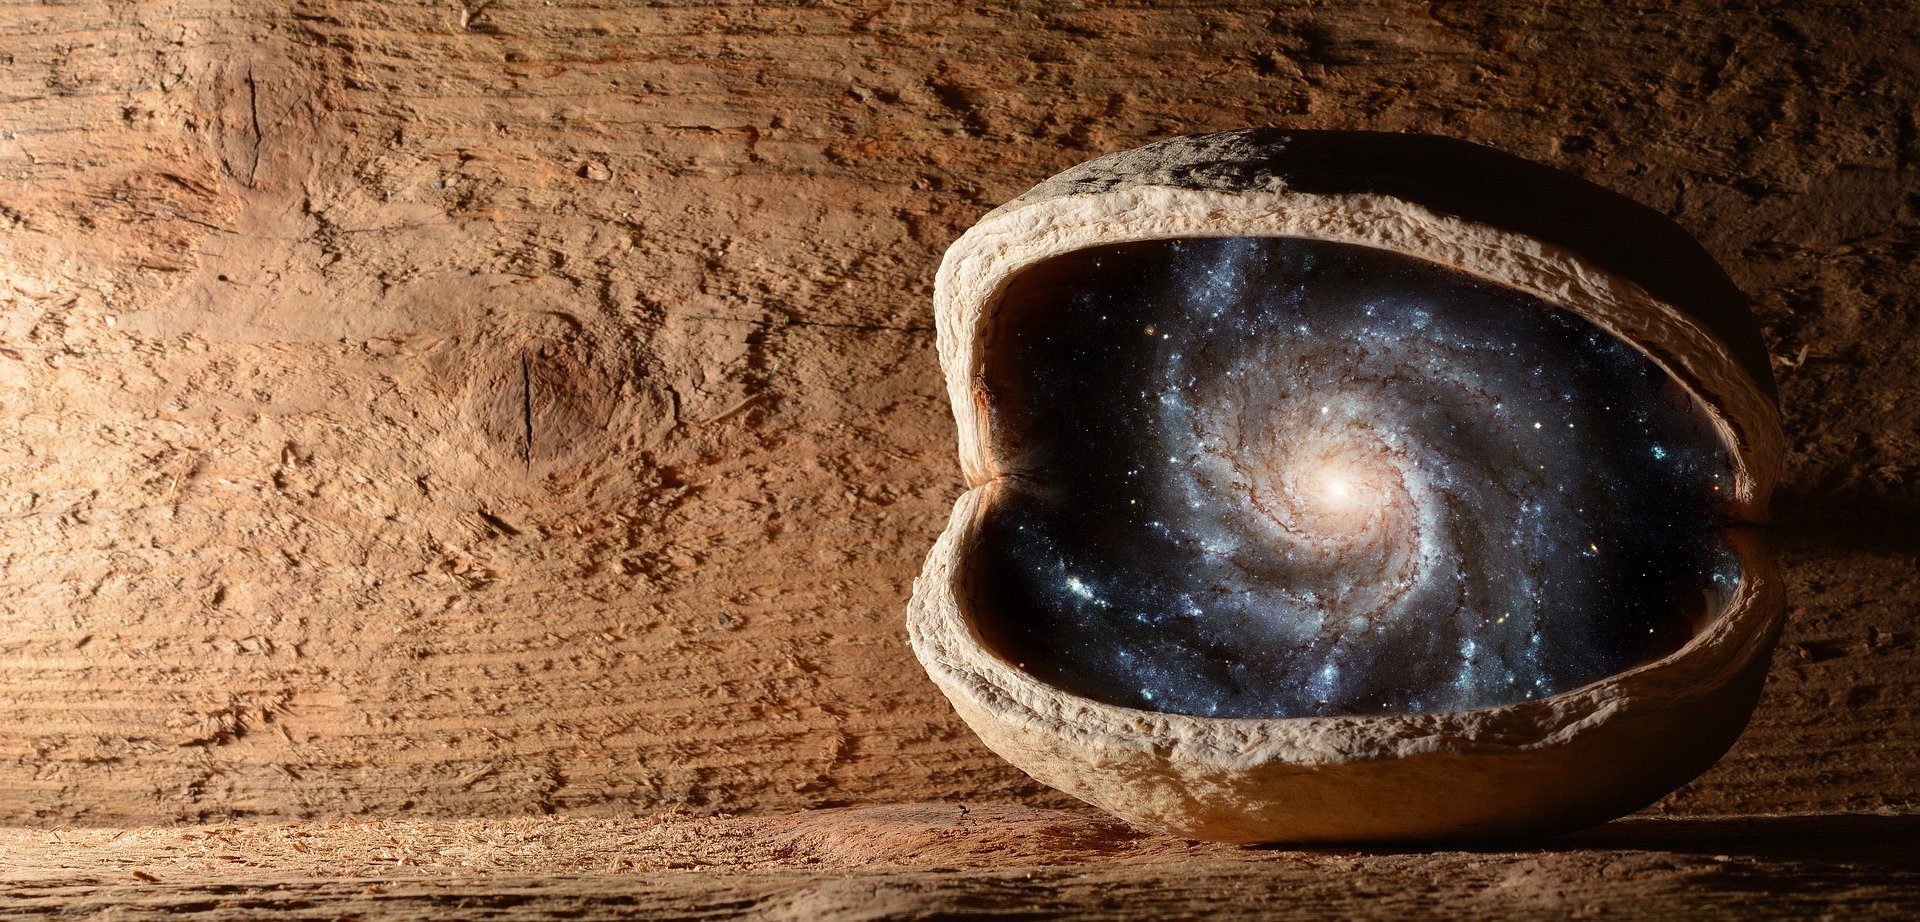 A walnut with the universe inside it. The nut sits on a wooden shelf in a wooden hut.